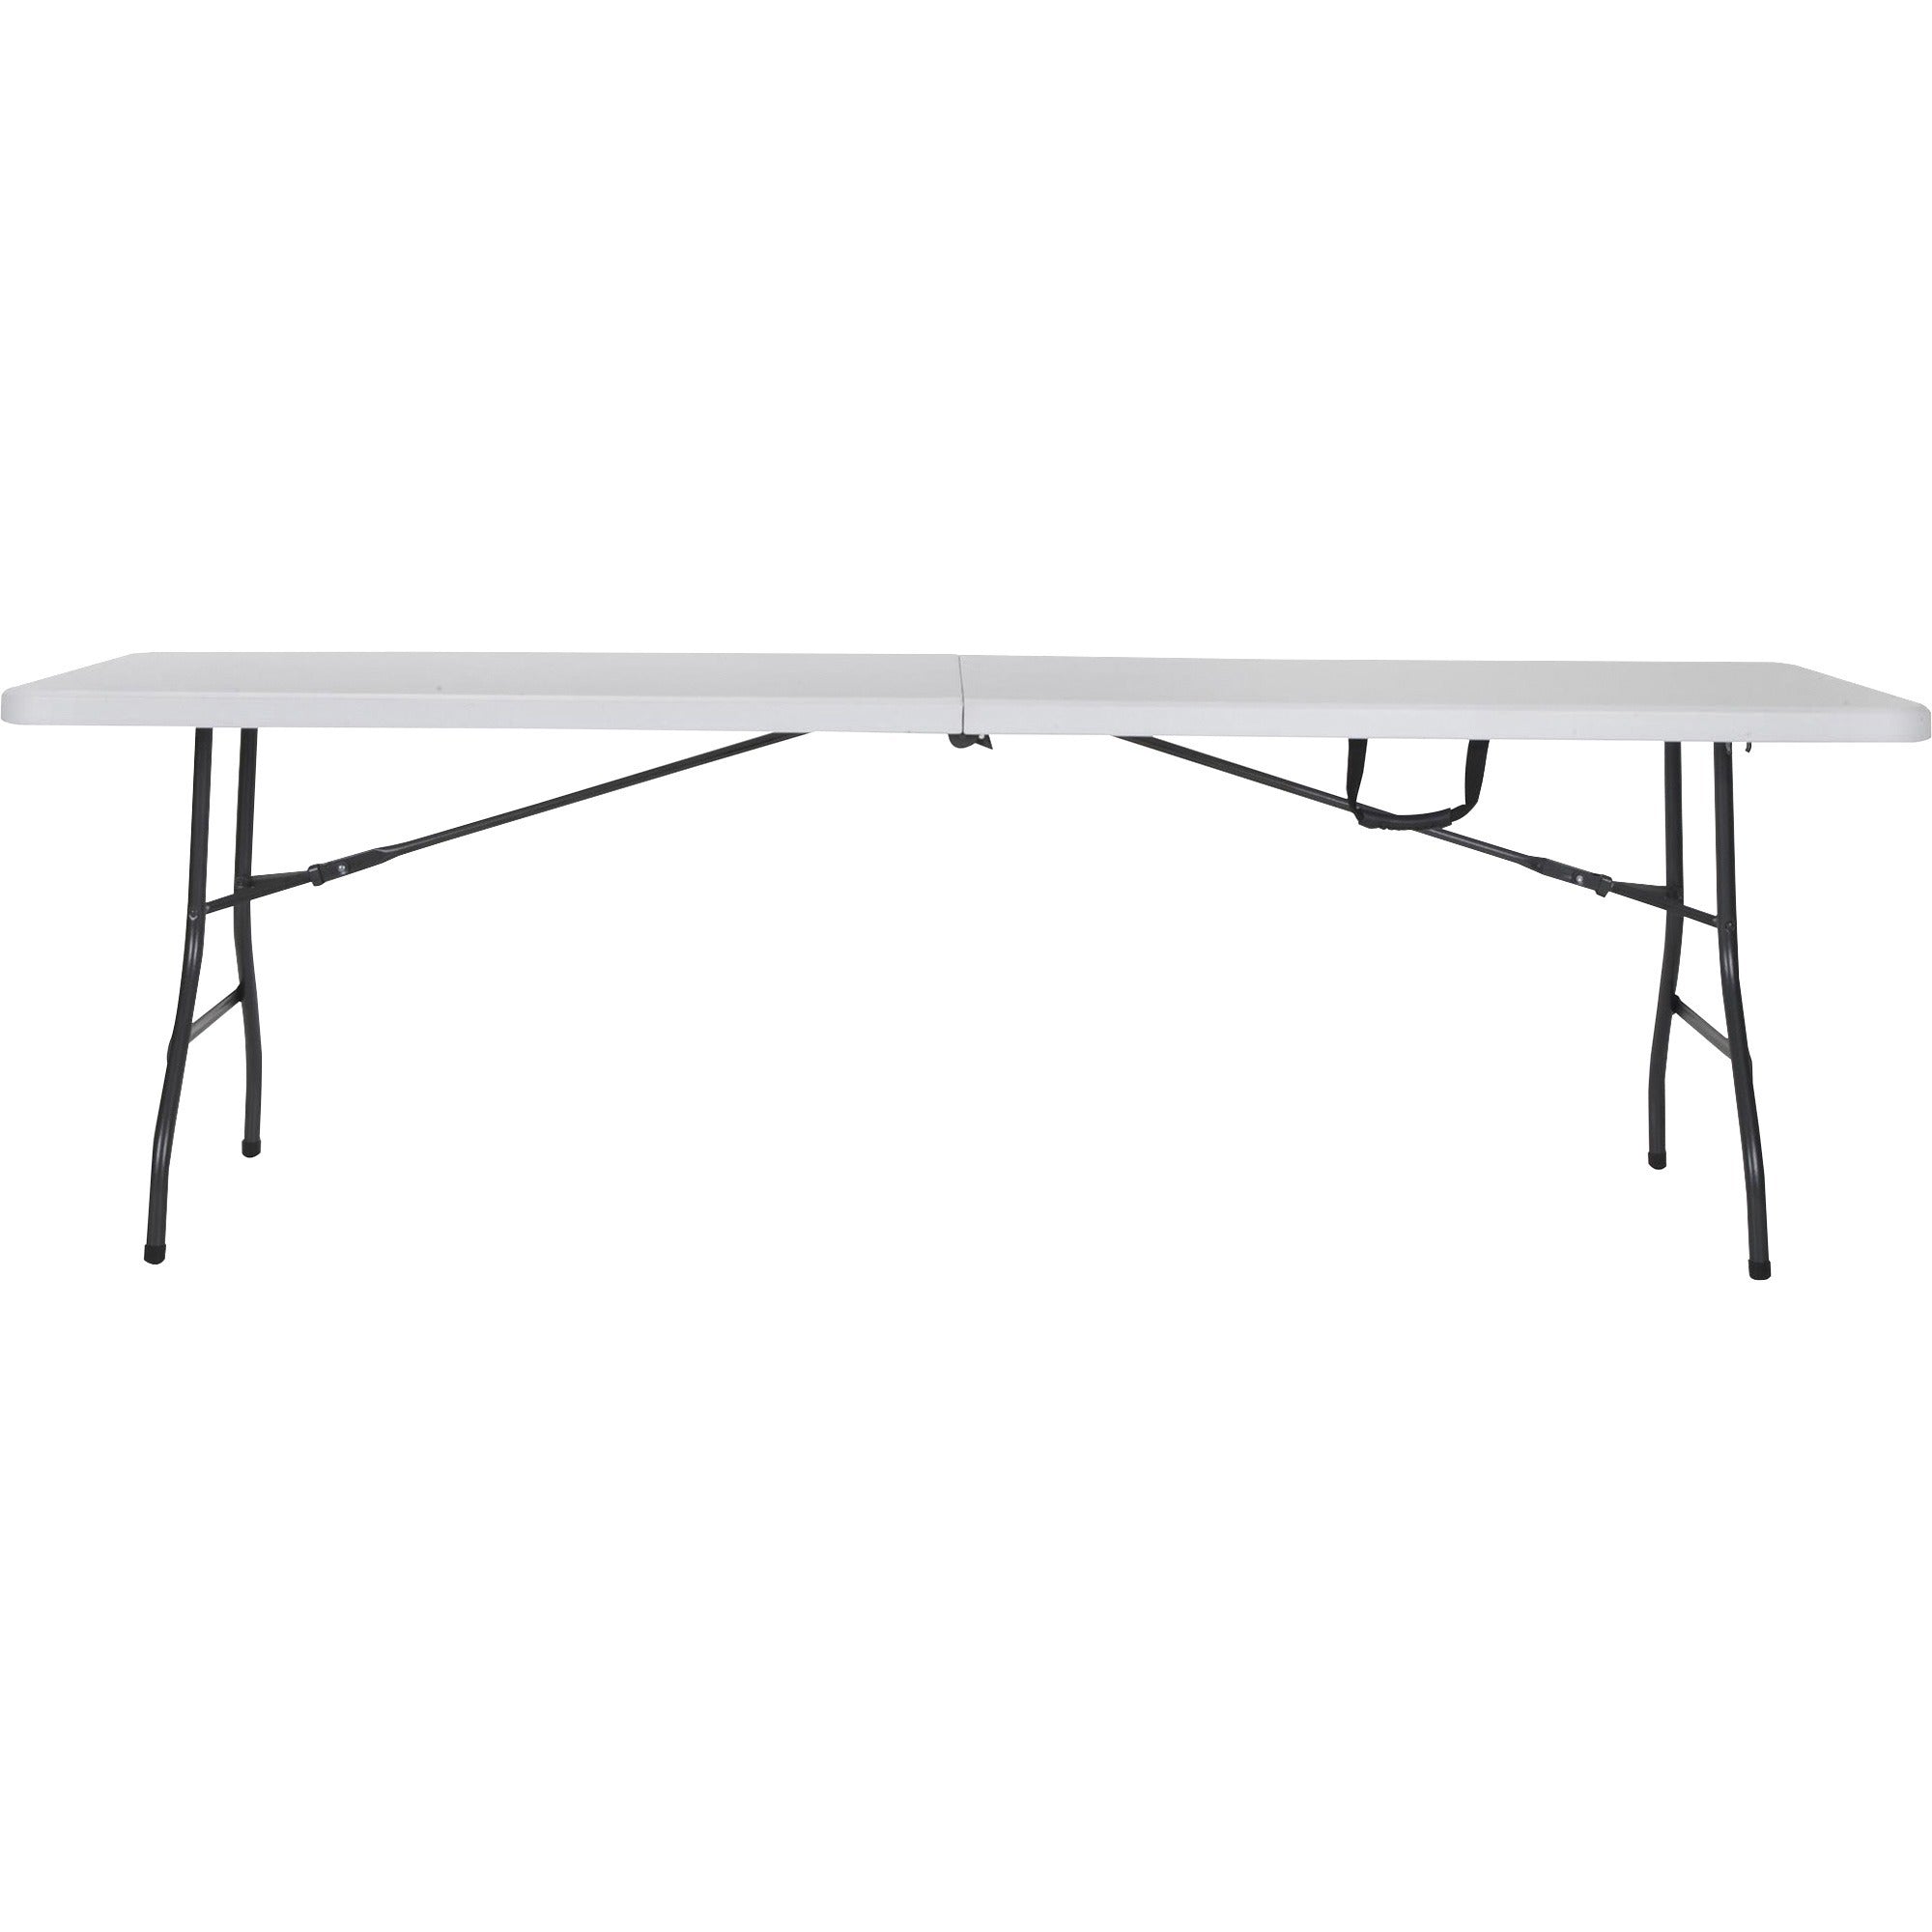 cosco-fold-in-half-blow-molded-table-for-table-toprectangle-top-four-leg-base-4-legs-300-lb-capacity-x-30-table-top-width-x-96-table-top-depth-2925-height-white-1-each_csc14778wsl1x - 3